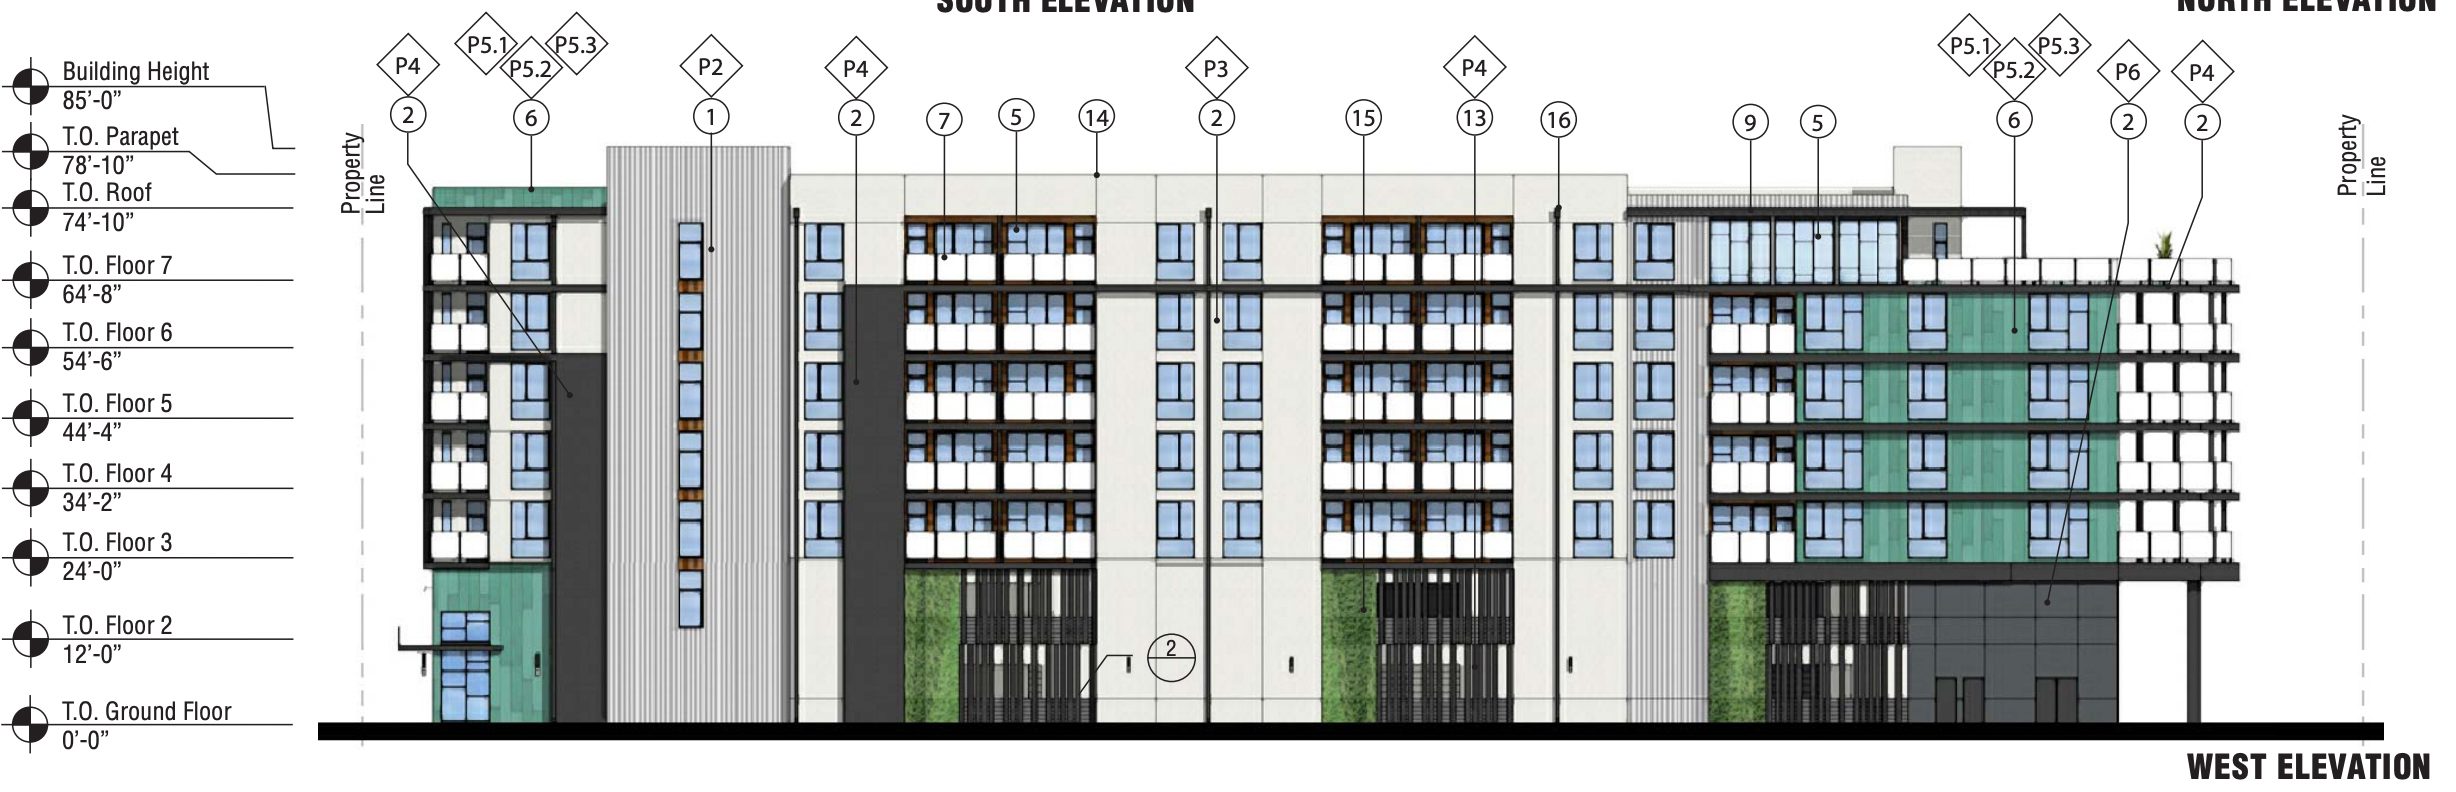 750 West San Carlos elevation, image via SGPA Architecture and Planning